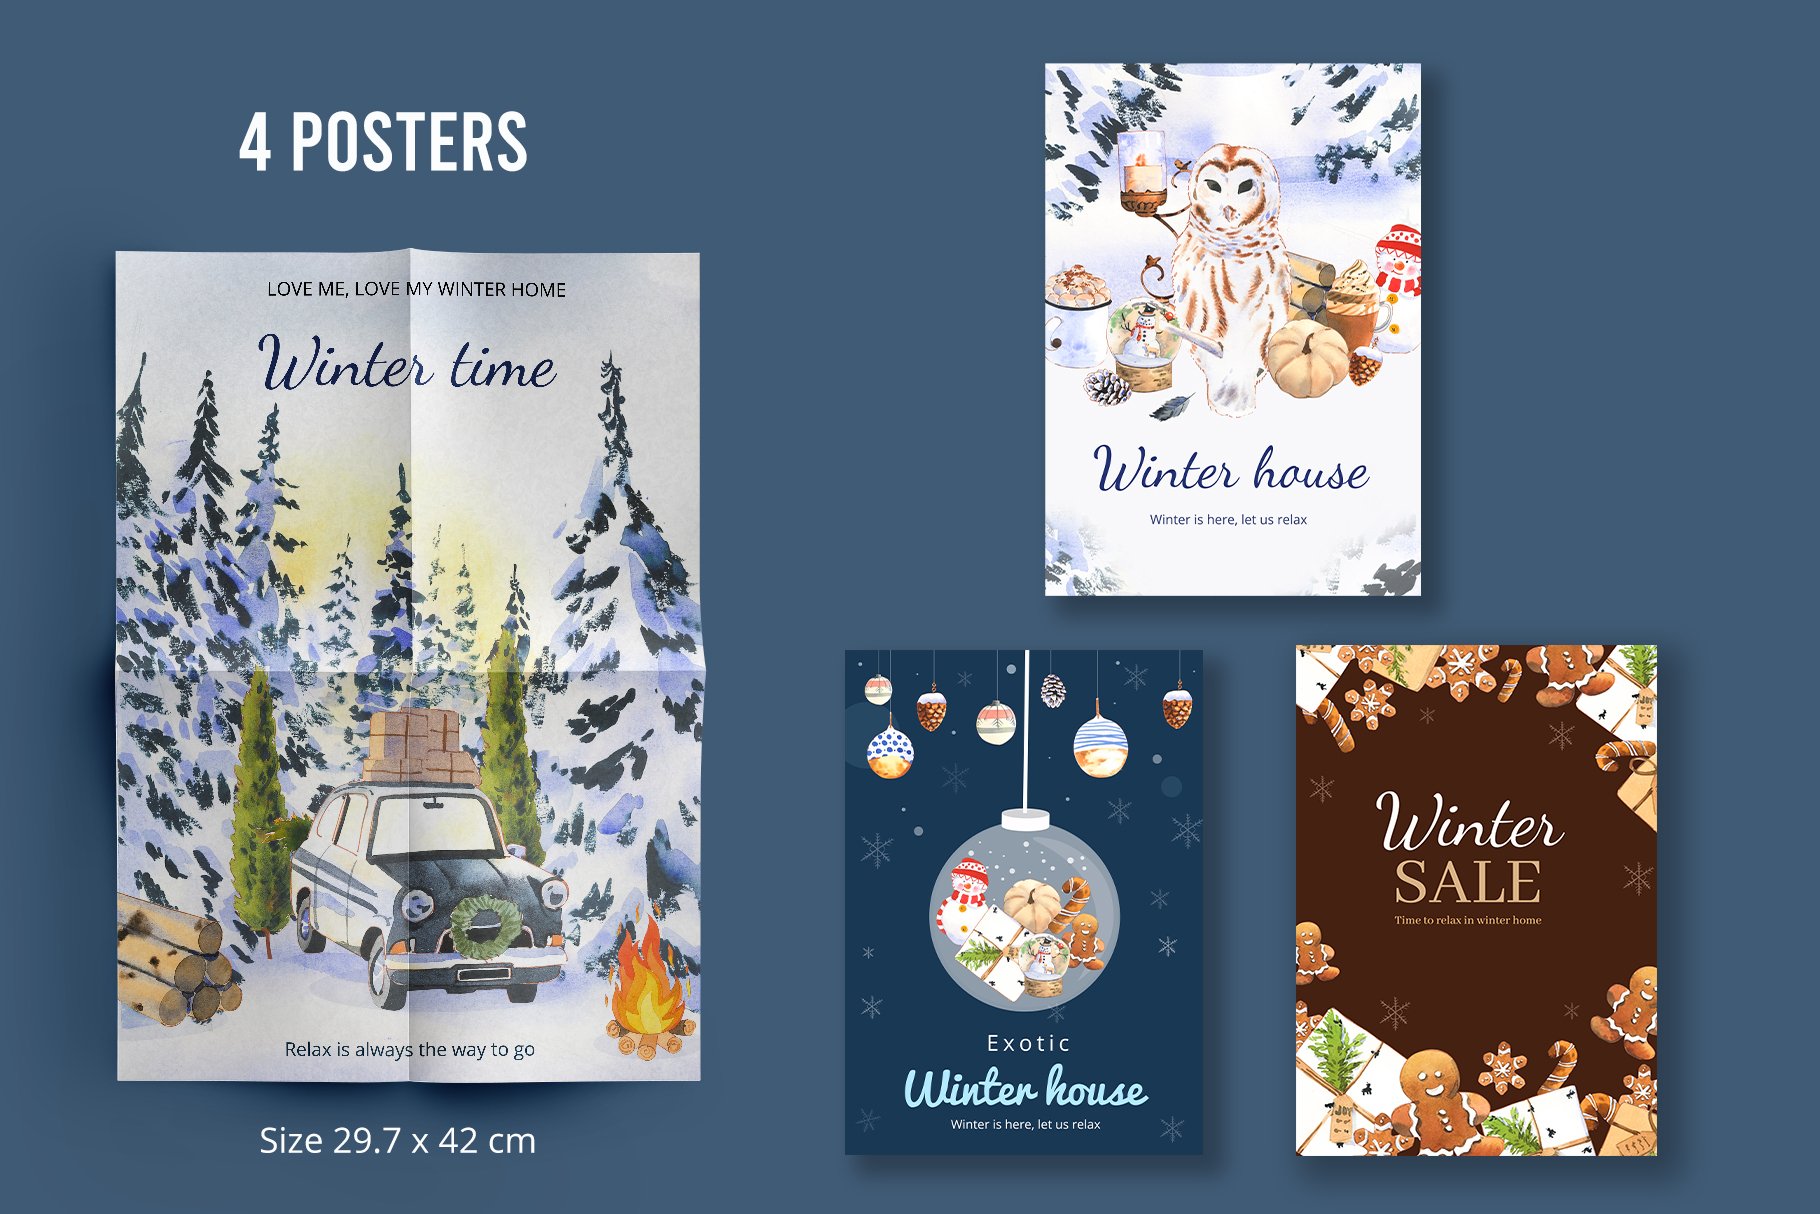 The thematic winter home posters.